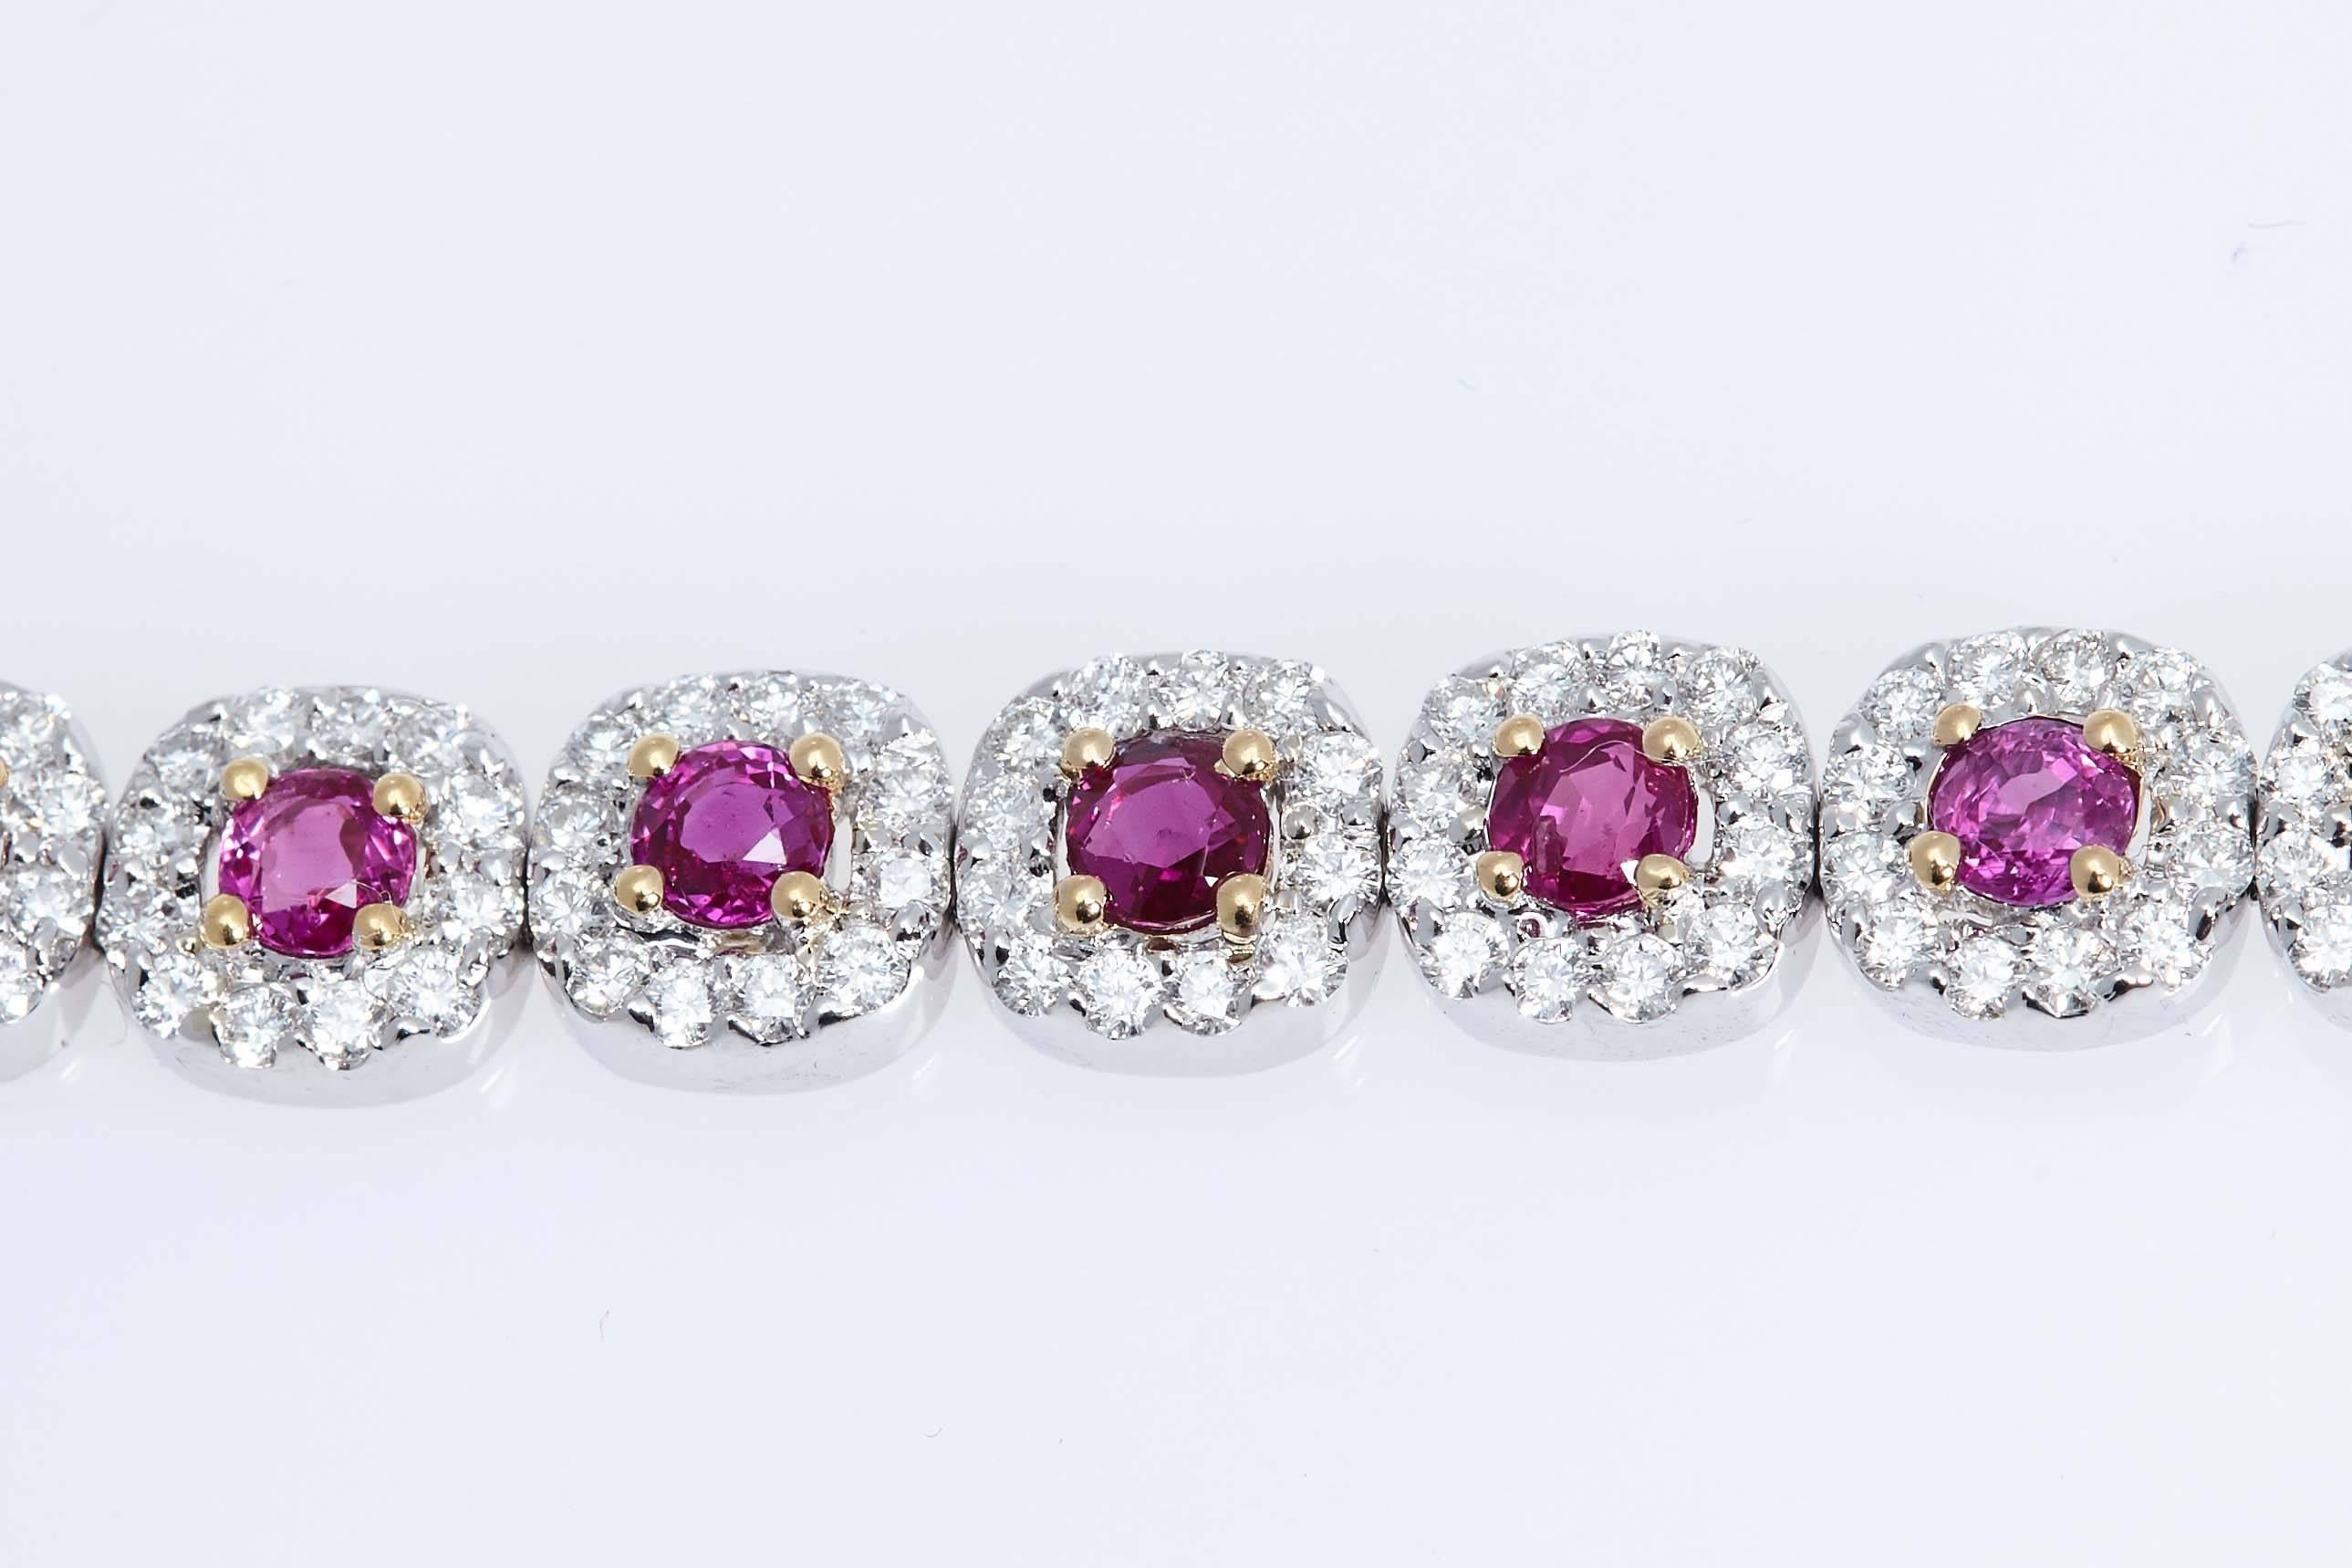 Eighteen karat white and yellow gold bracelet made up of twenty round Burmese rubies, each ruby is encircled by 12 round diamonds. The rubies have a total weight of 6.93 carats and the diamonds have a total weight of 4.84 carats. The rubies are set